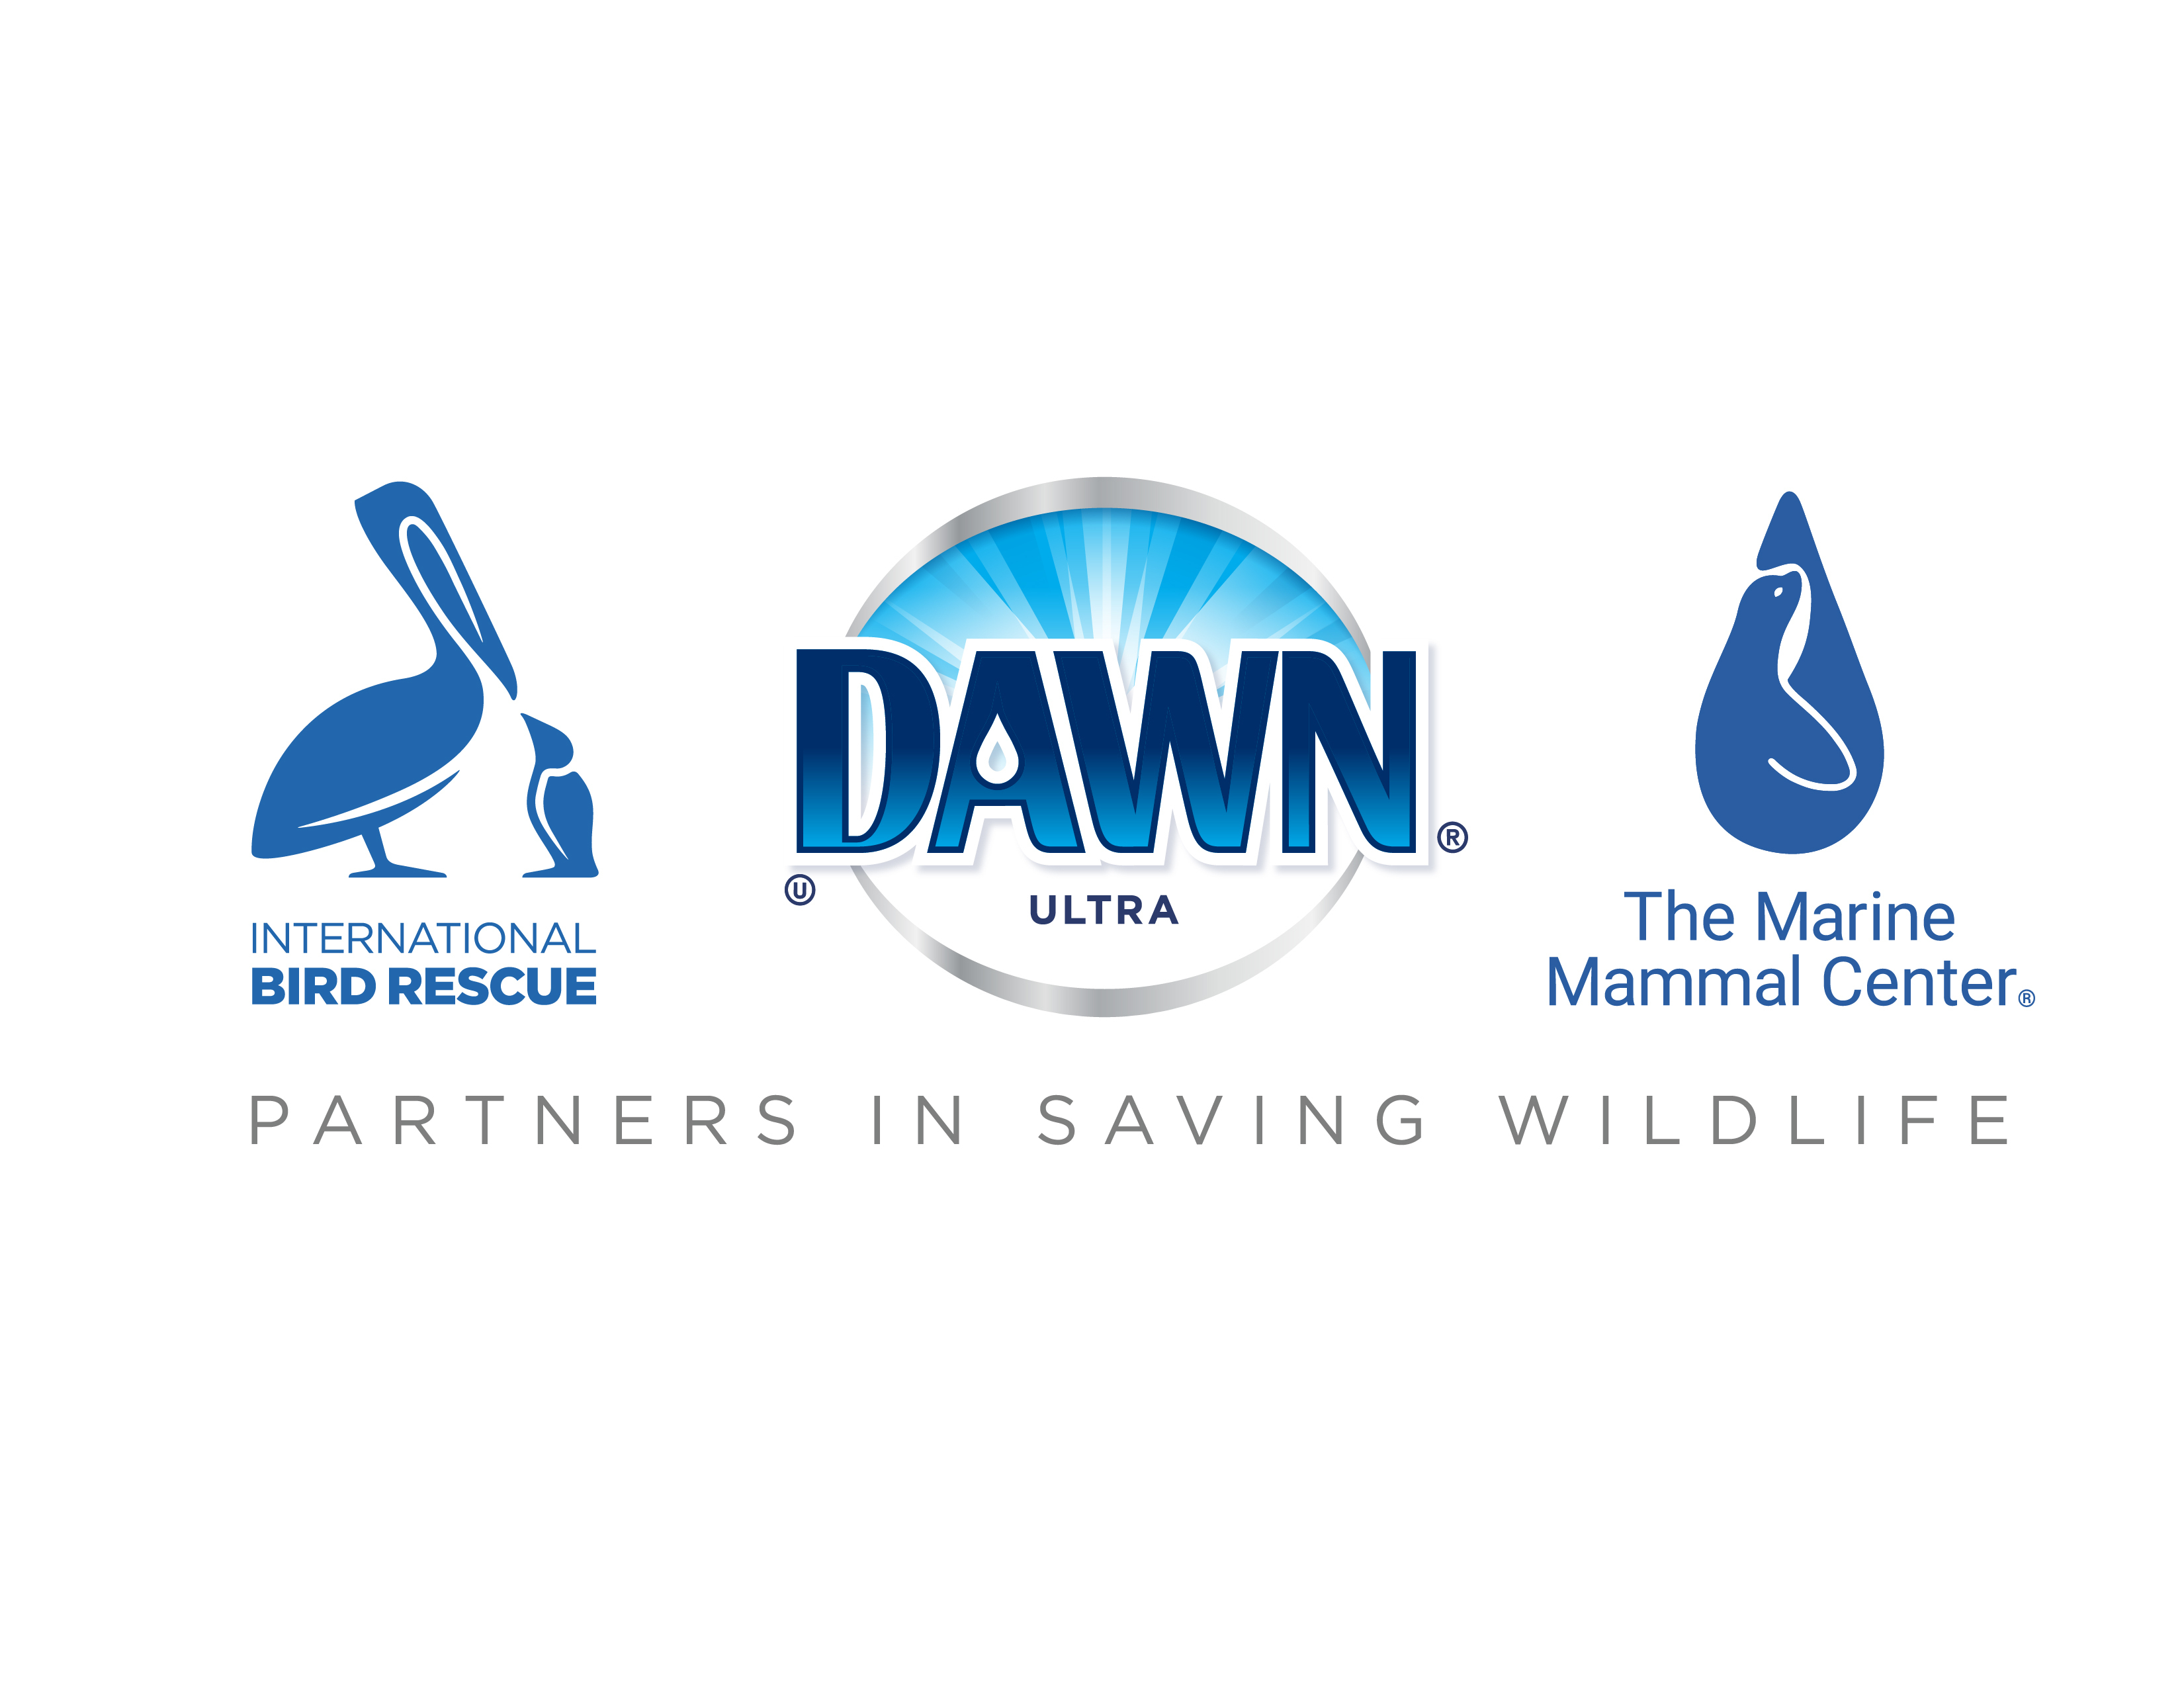 Dawn® Dish Soap Launches Next Wave of Efforts to Help Save Wildlife